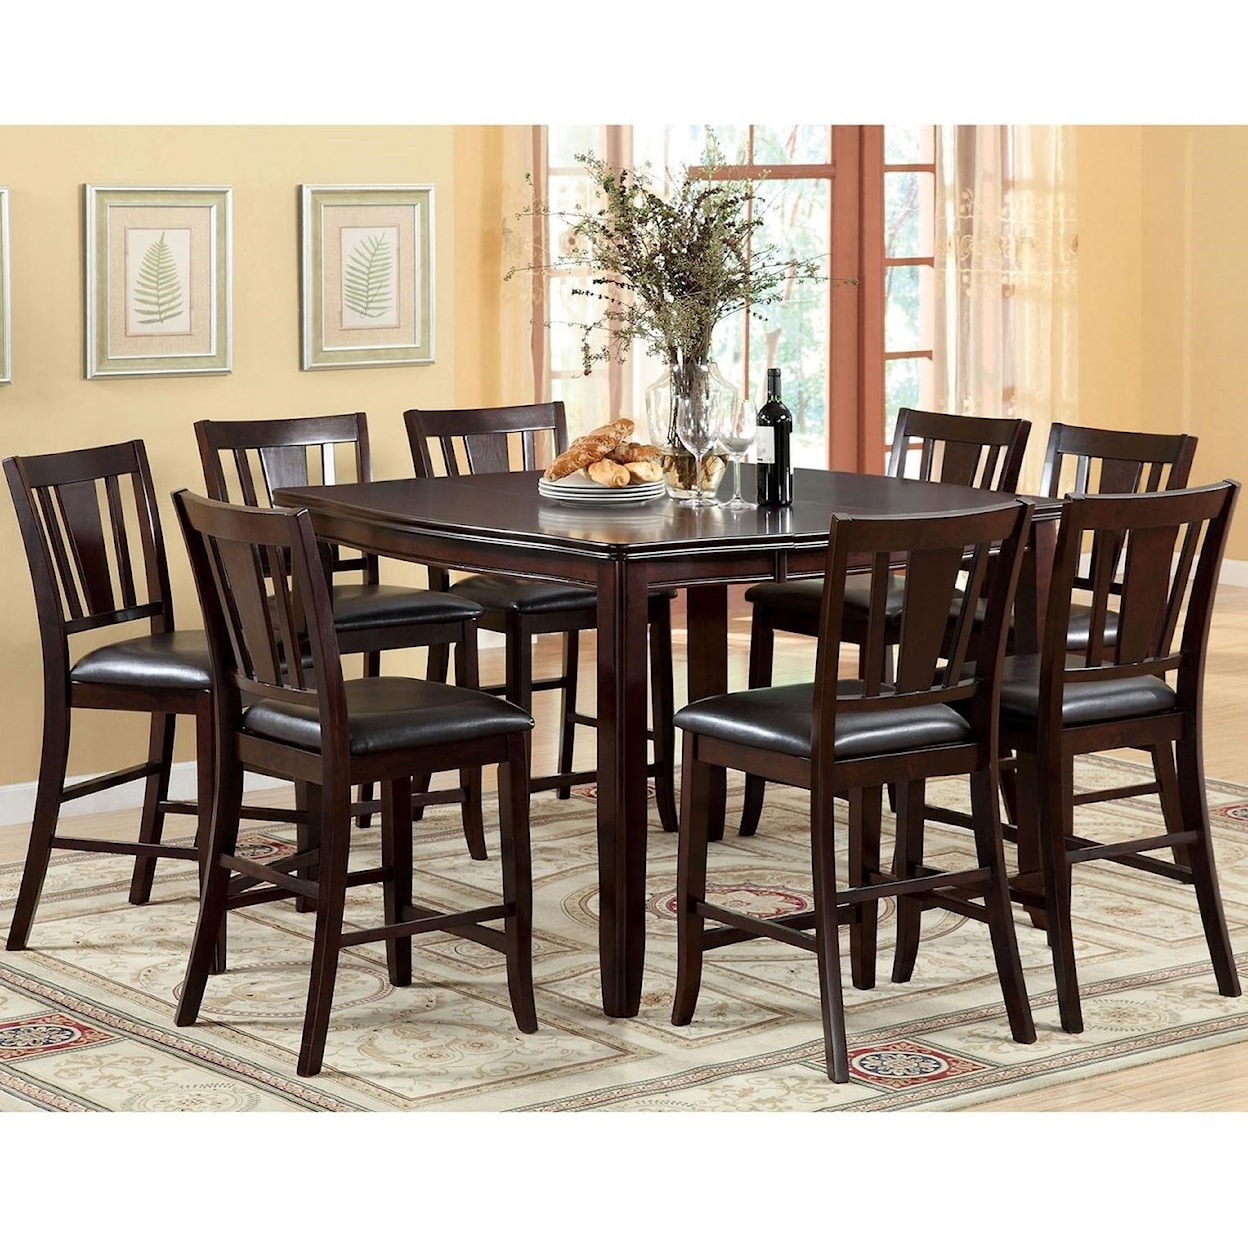 Furniture of America - FOA Edgewood Counter Height Dining Set